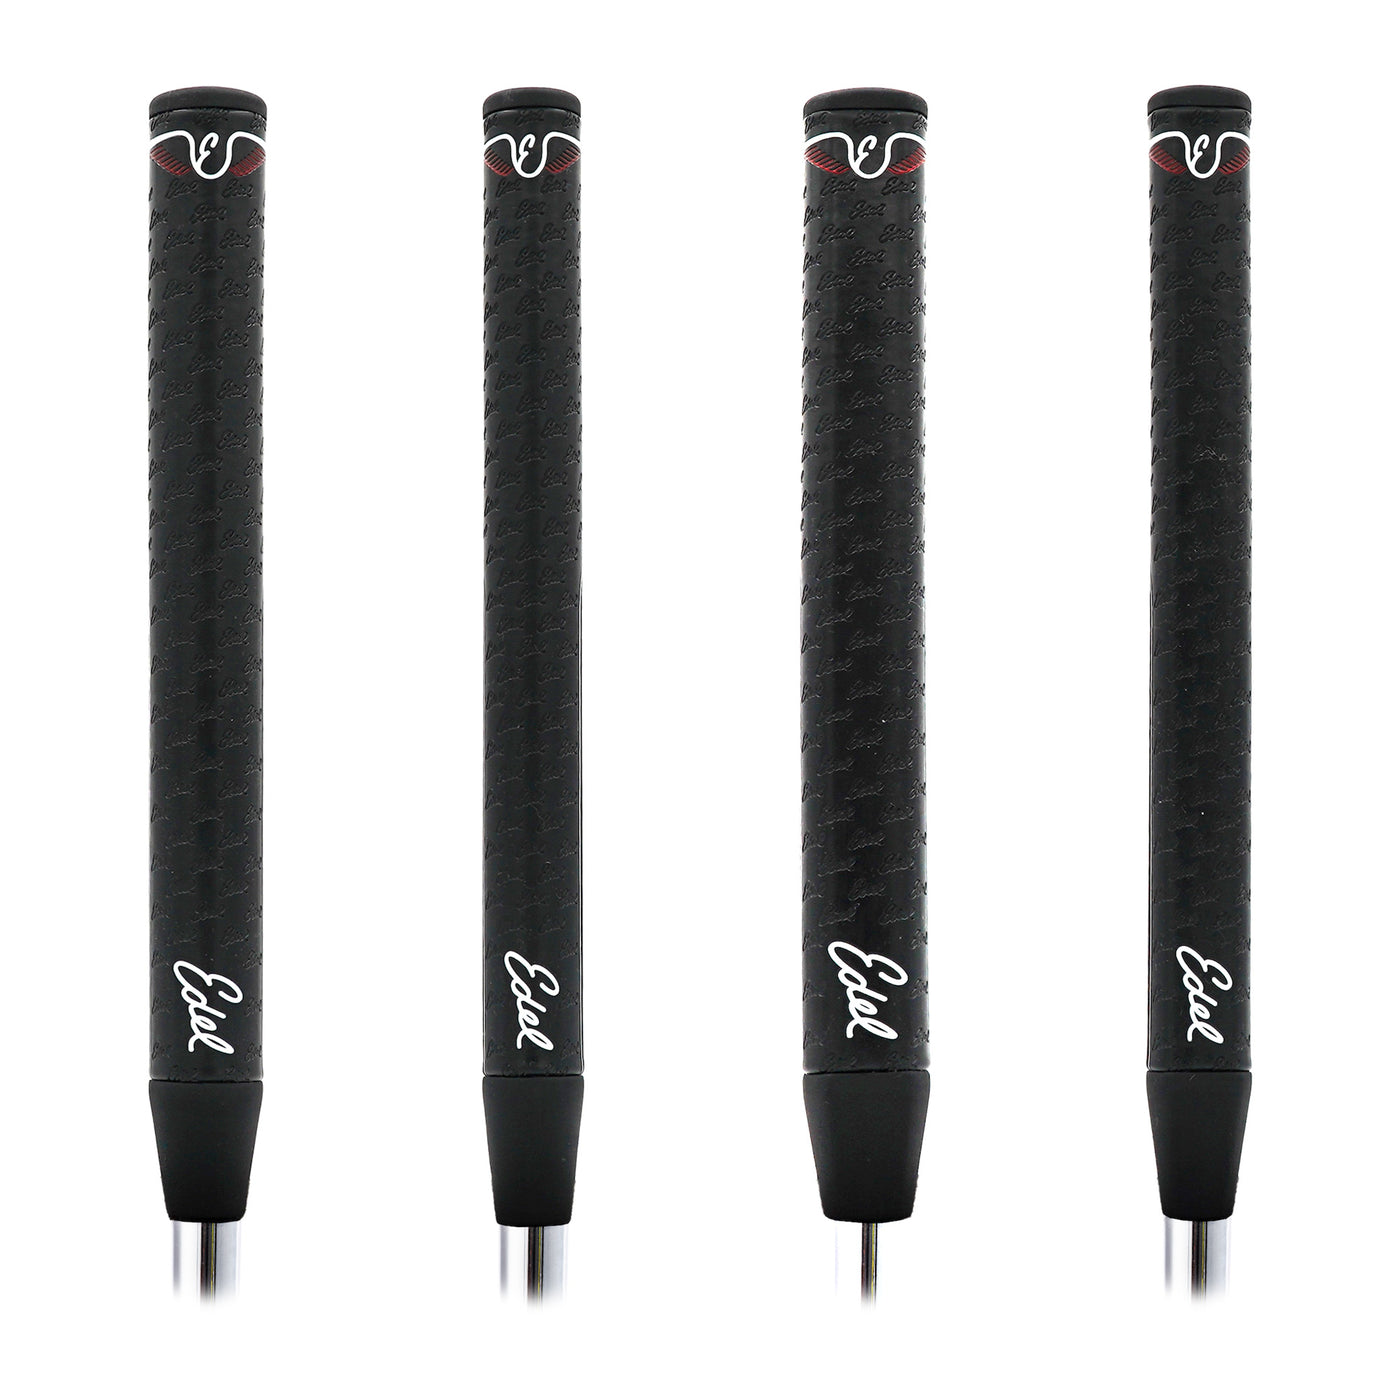 Edel Golf Dual Layer Putter Grips